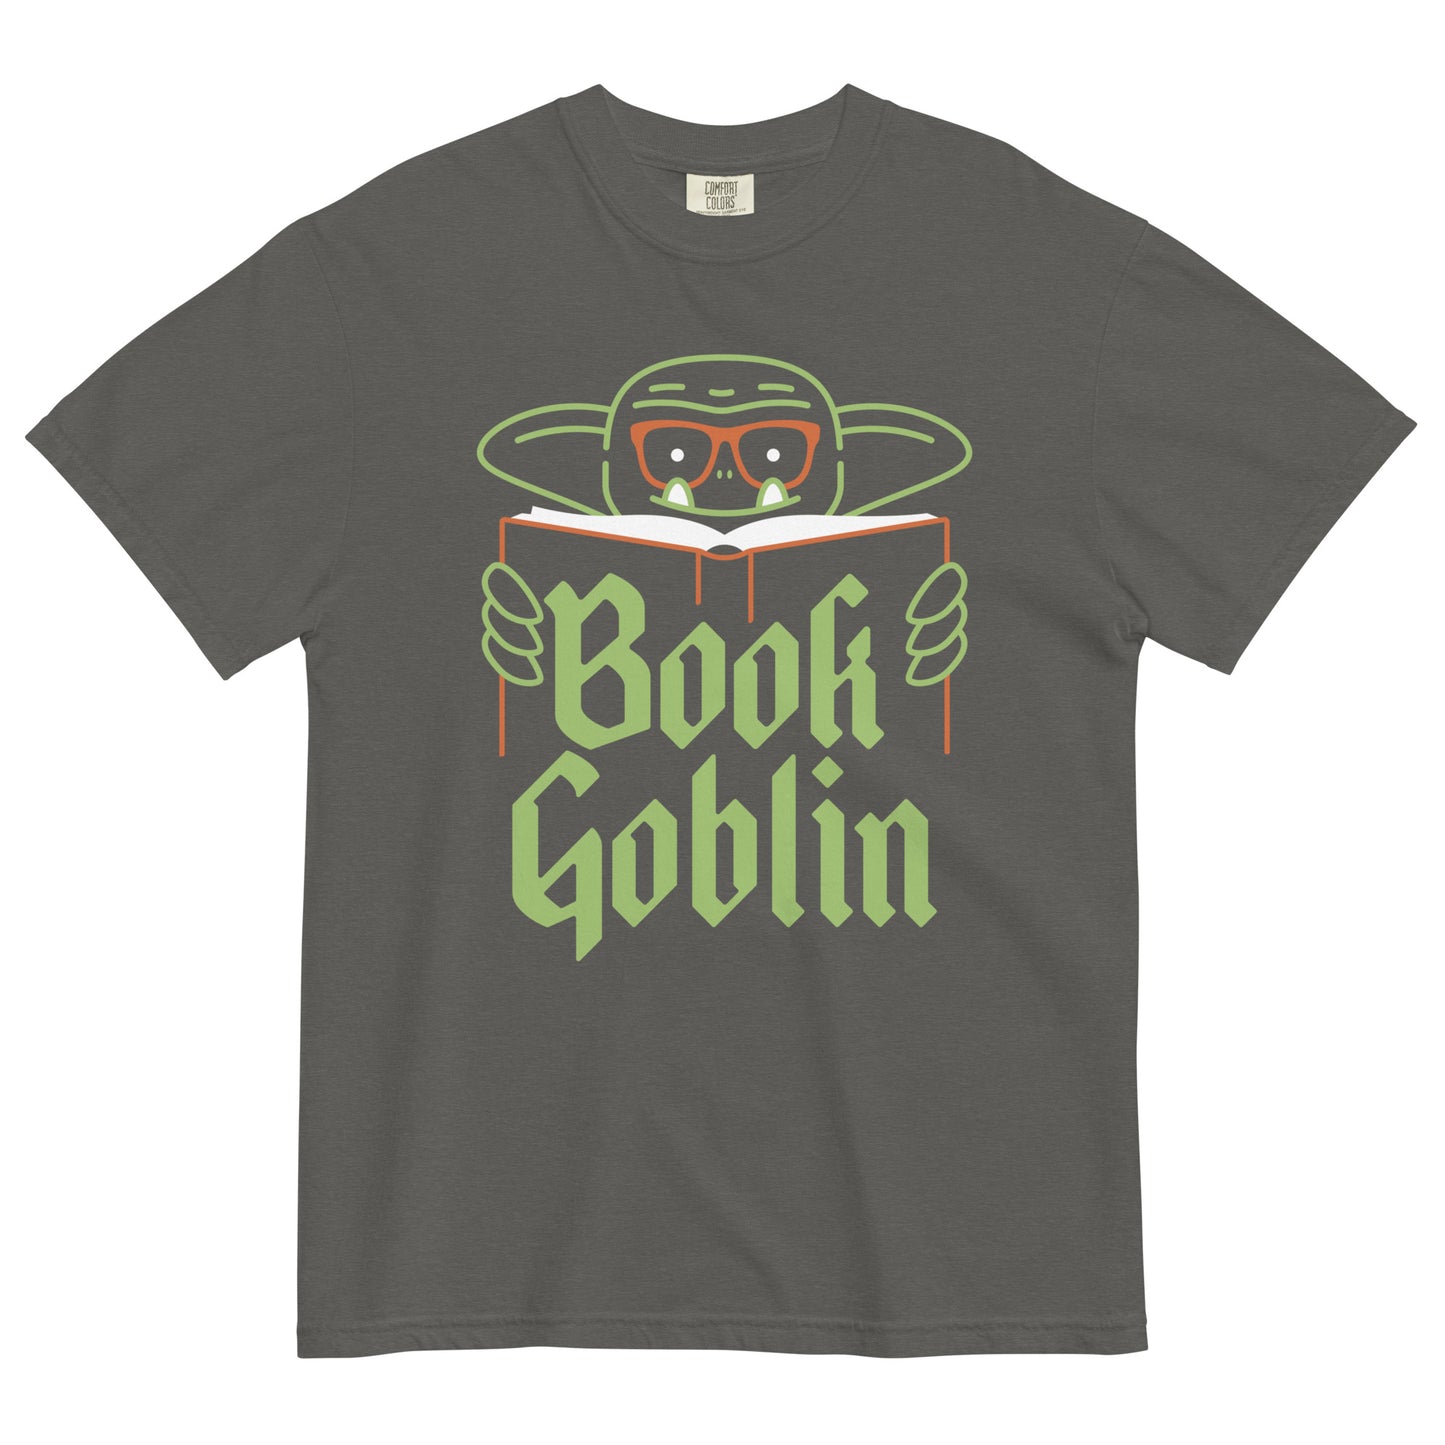 Book Goblin Men's Relaxed Fit Tee